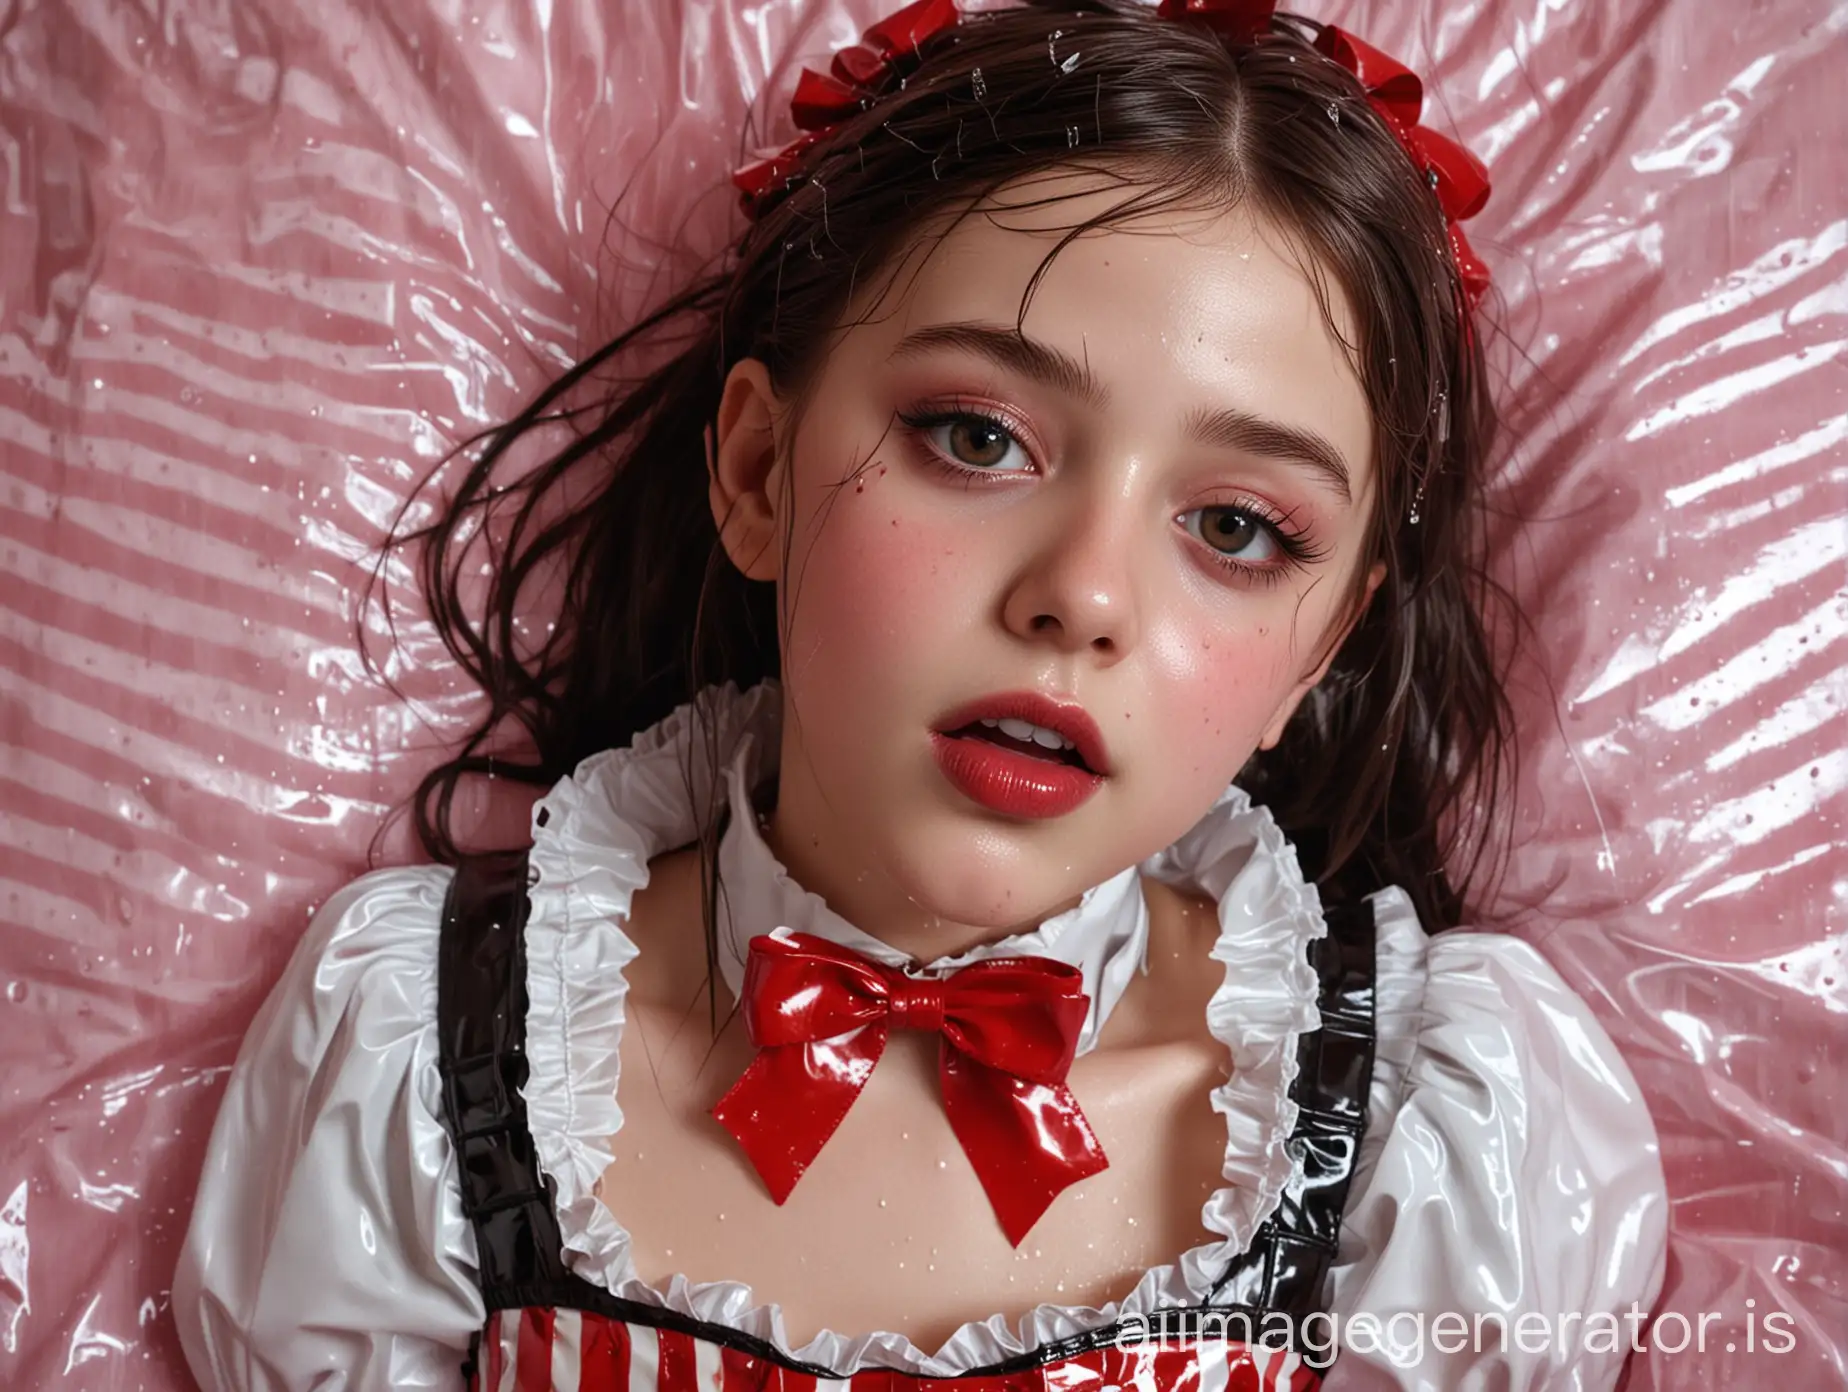 hyperrealistic image in the highest quality. full body photo of a 10 year old french girl. extremely skinny. extremely white skin. big darkbrown eyes. mouth wide open. lips extremely shiny by a lot of the shiniest red lipgloss. the girl is lying on satin sheets under heavy rain. mouth (inside and outside), face, hair, and cloth are totally wet by the rain. she is wearing an extremely shiny latex sweet lolita outfit. collared and ffully closed up. it is vertically striped in red and black. shiny latex ribbon over the collar, big shiny latex lolita ribbon in the hair. over the dress she wears a shiny latex pinafore. no jewellery. no elements made of stones or metal.